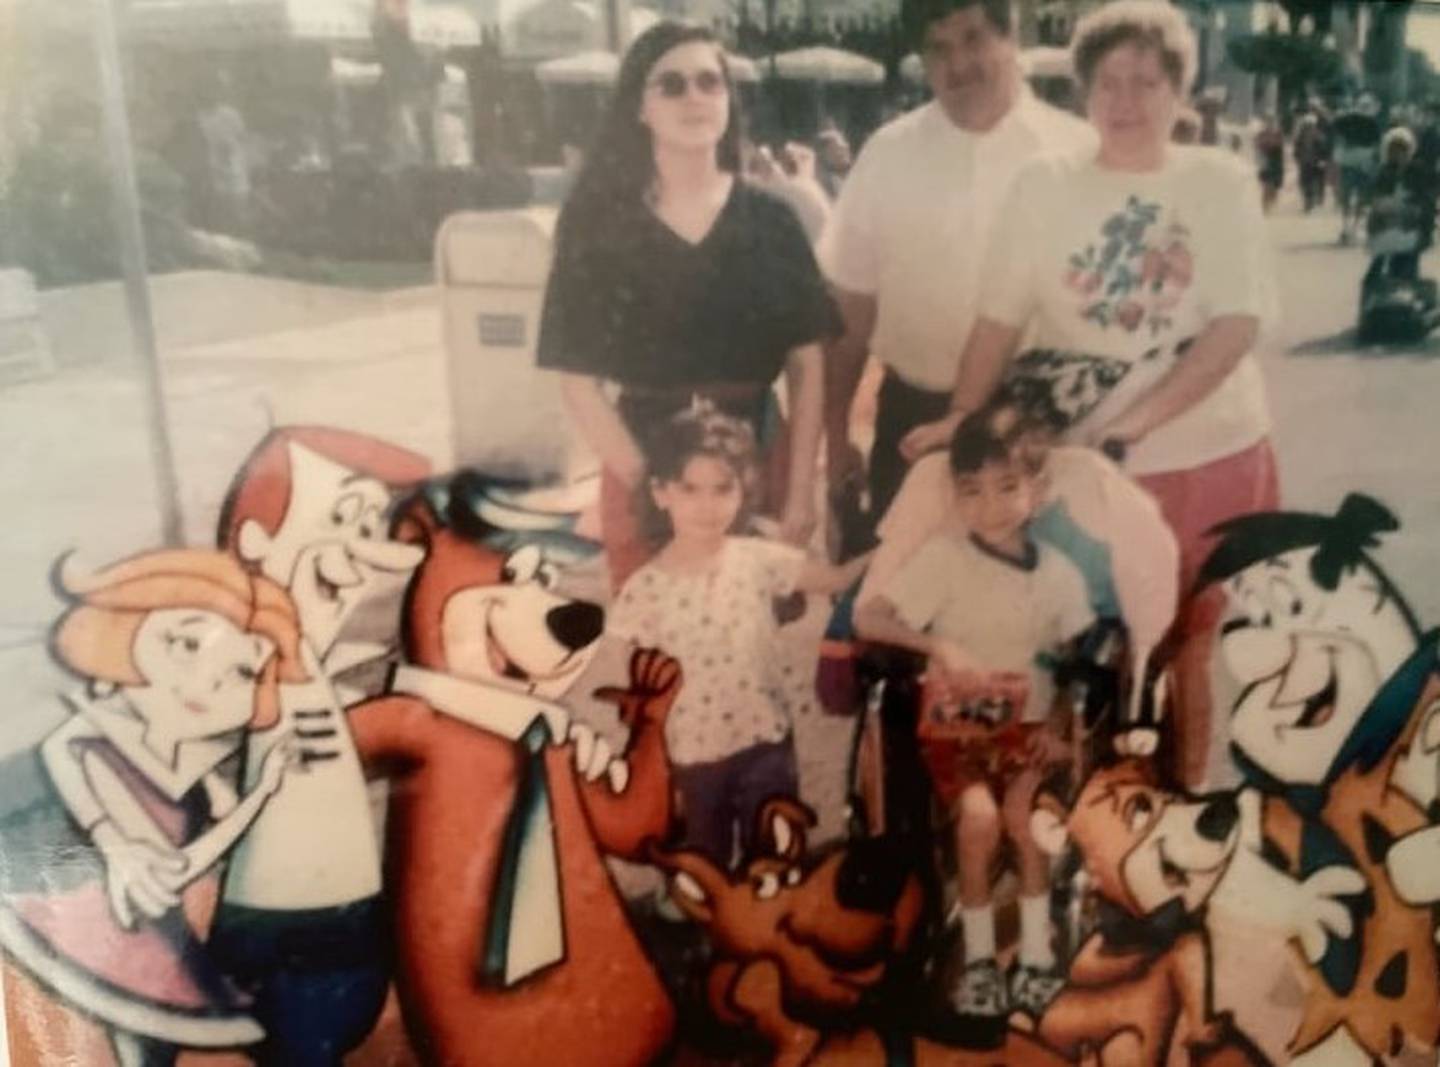 Former Joliet resident Carol Juricic is shown with her husband Bill, oldest daughter Jeanette, daughter Sheila and son Bill at Disney World in Florida before Bill's death. Sheila and Paul cared for more than 250 foster children in their home over 25 years and adopted four children.